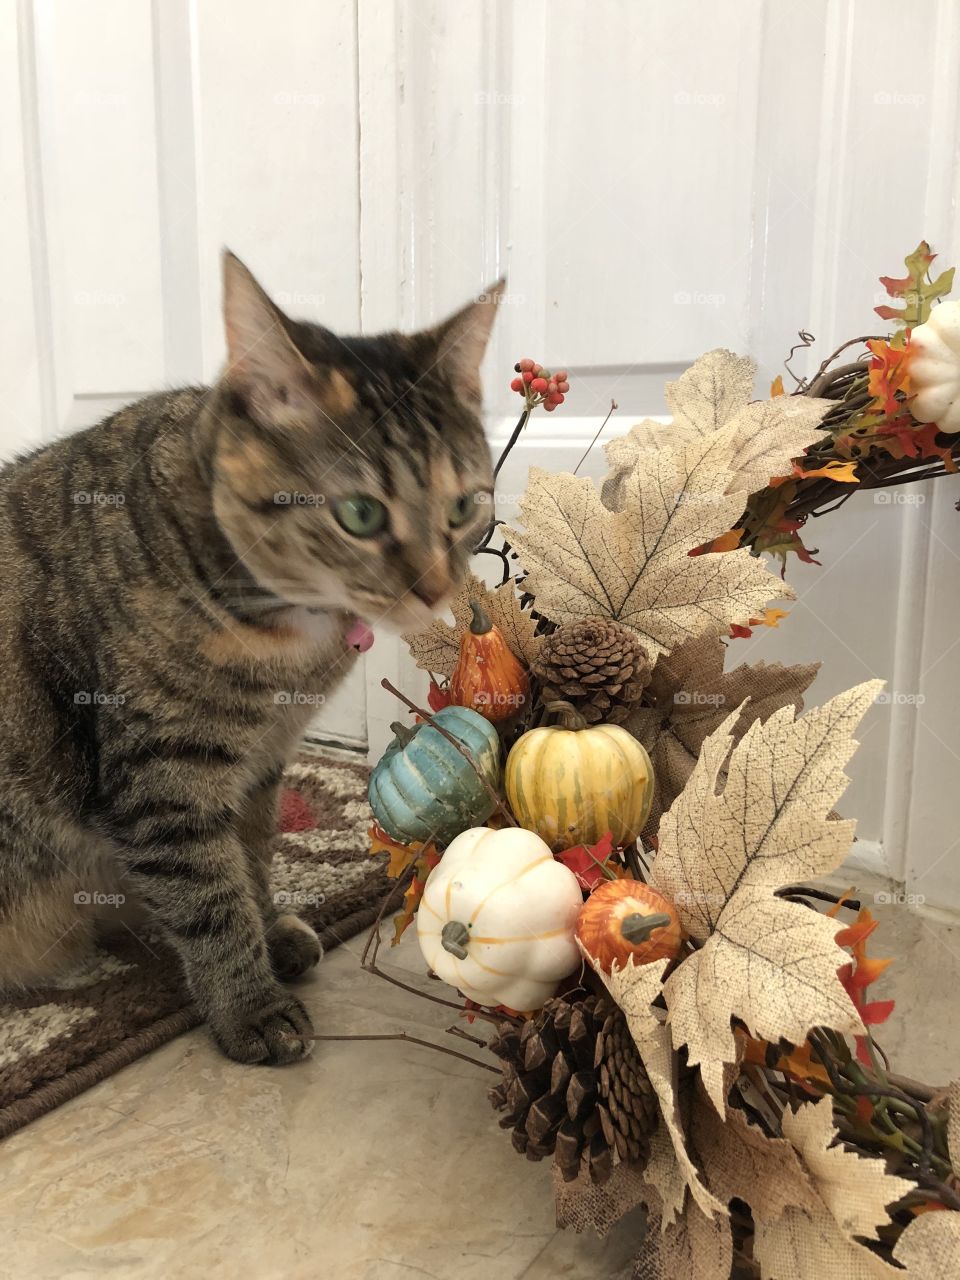 Allie the cat Still inspecting the fall decorations 